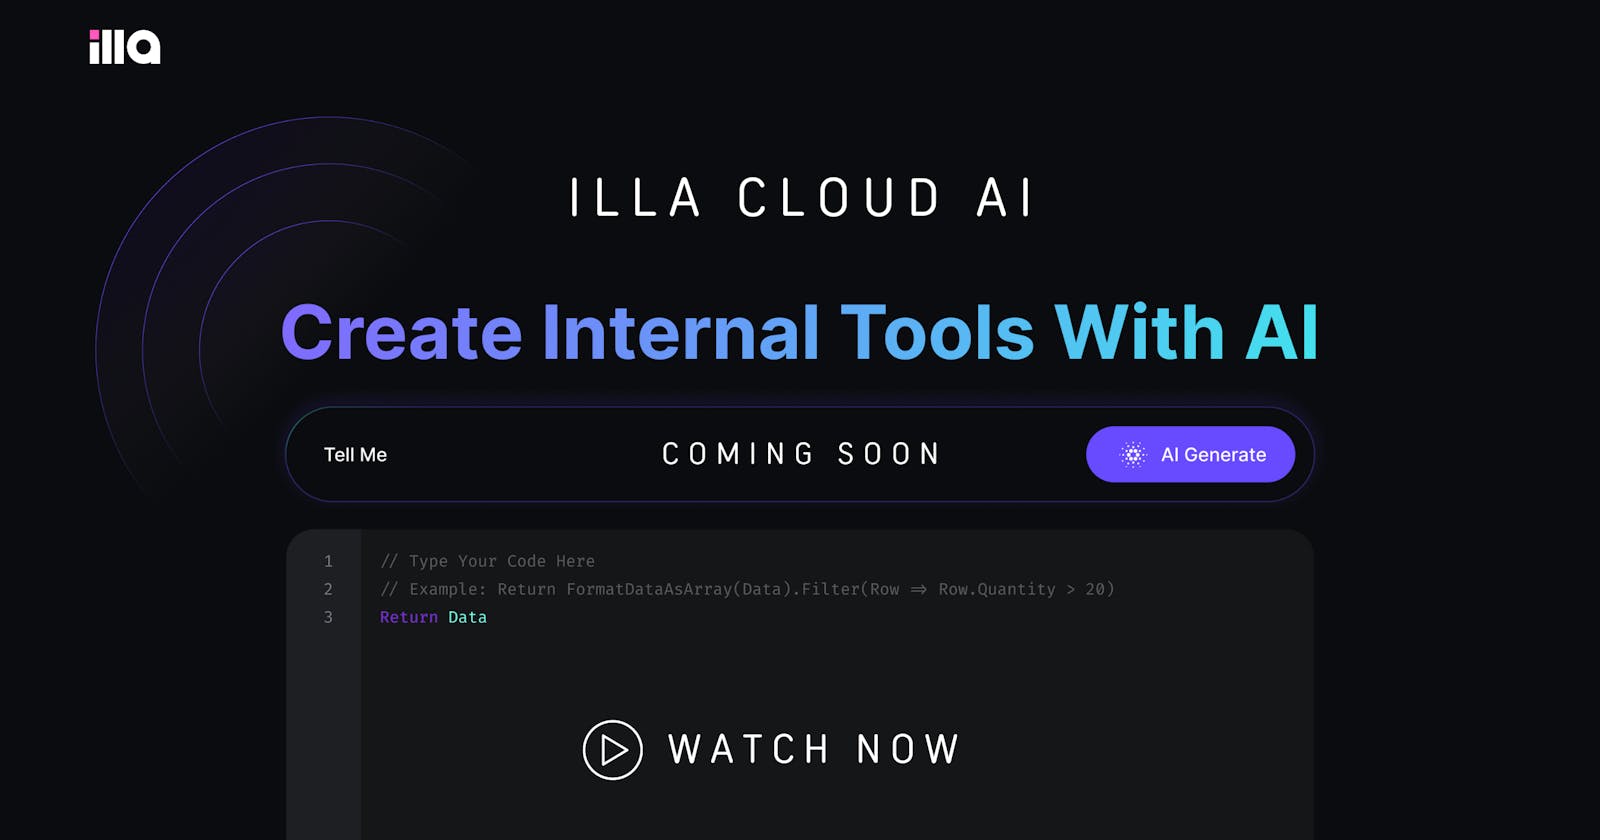 Introducing ILLA Cloud's Next-Level Feature: Harnessing the Power of AI Generation